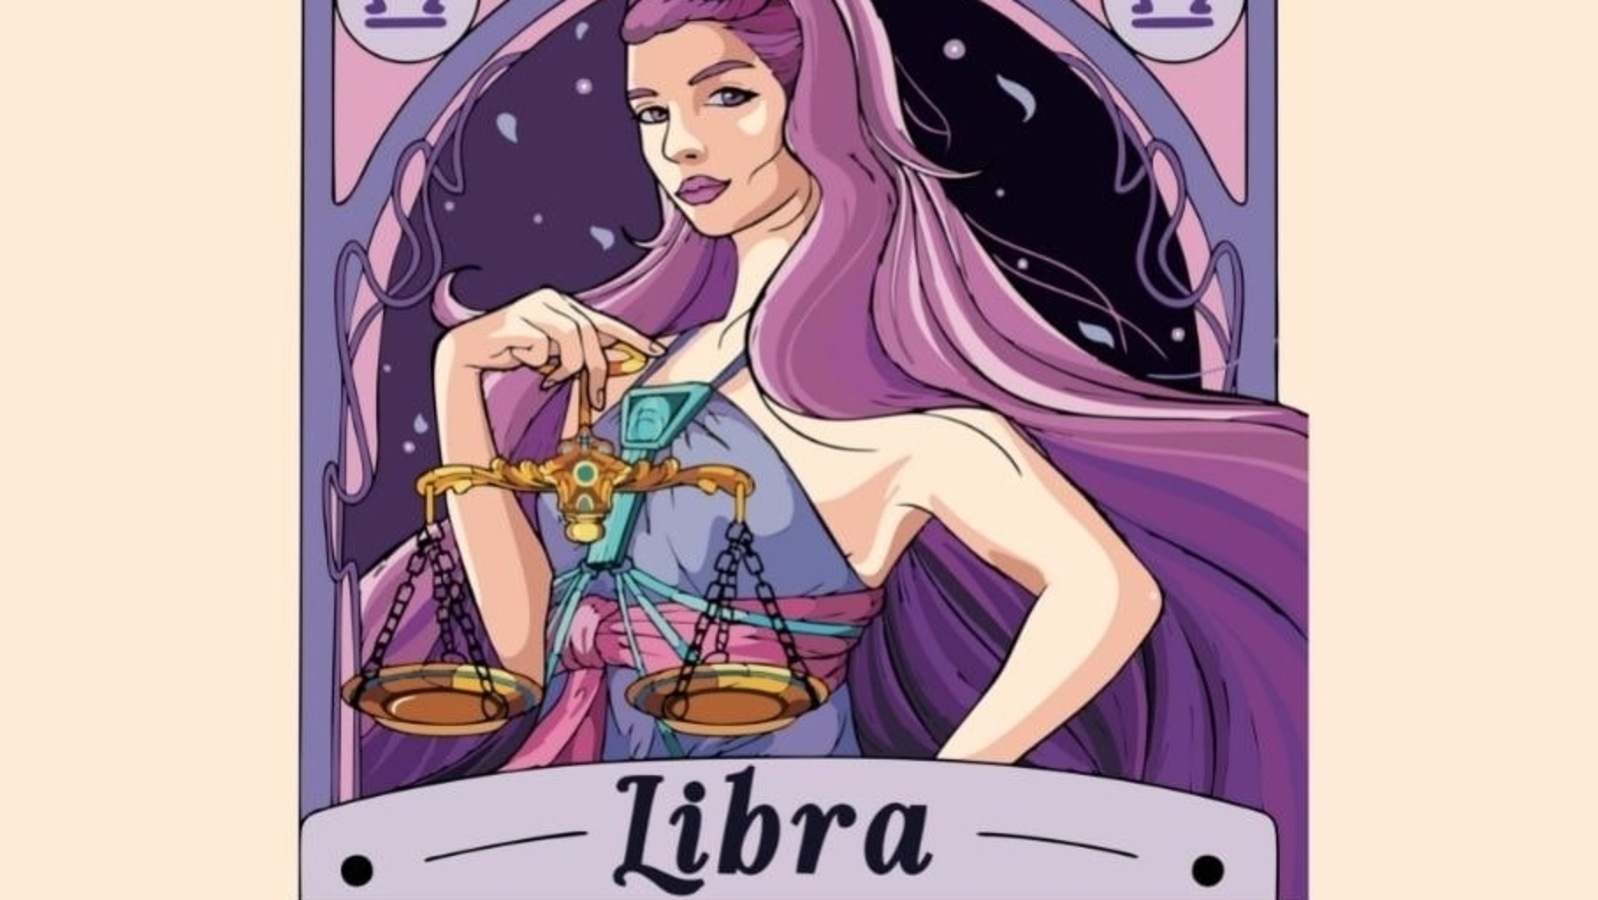 libra-daily-horoscope-for-august-21-2022-don-t-overexert-yourself-at-work